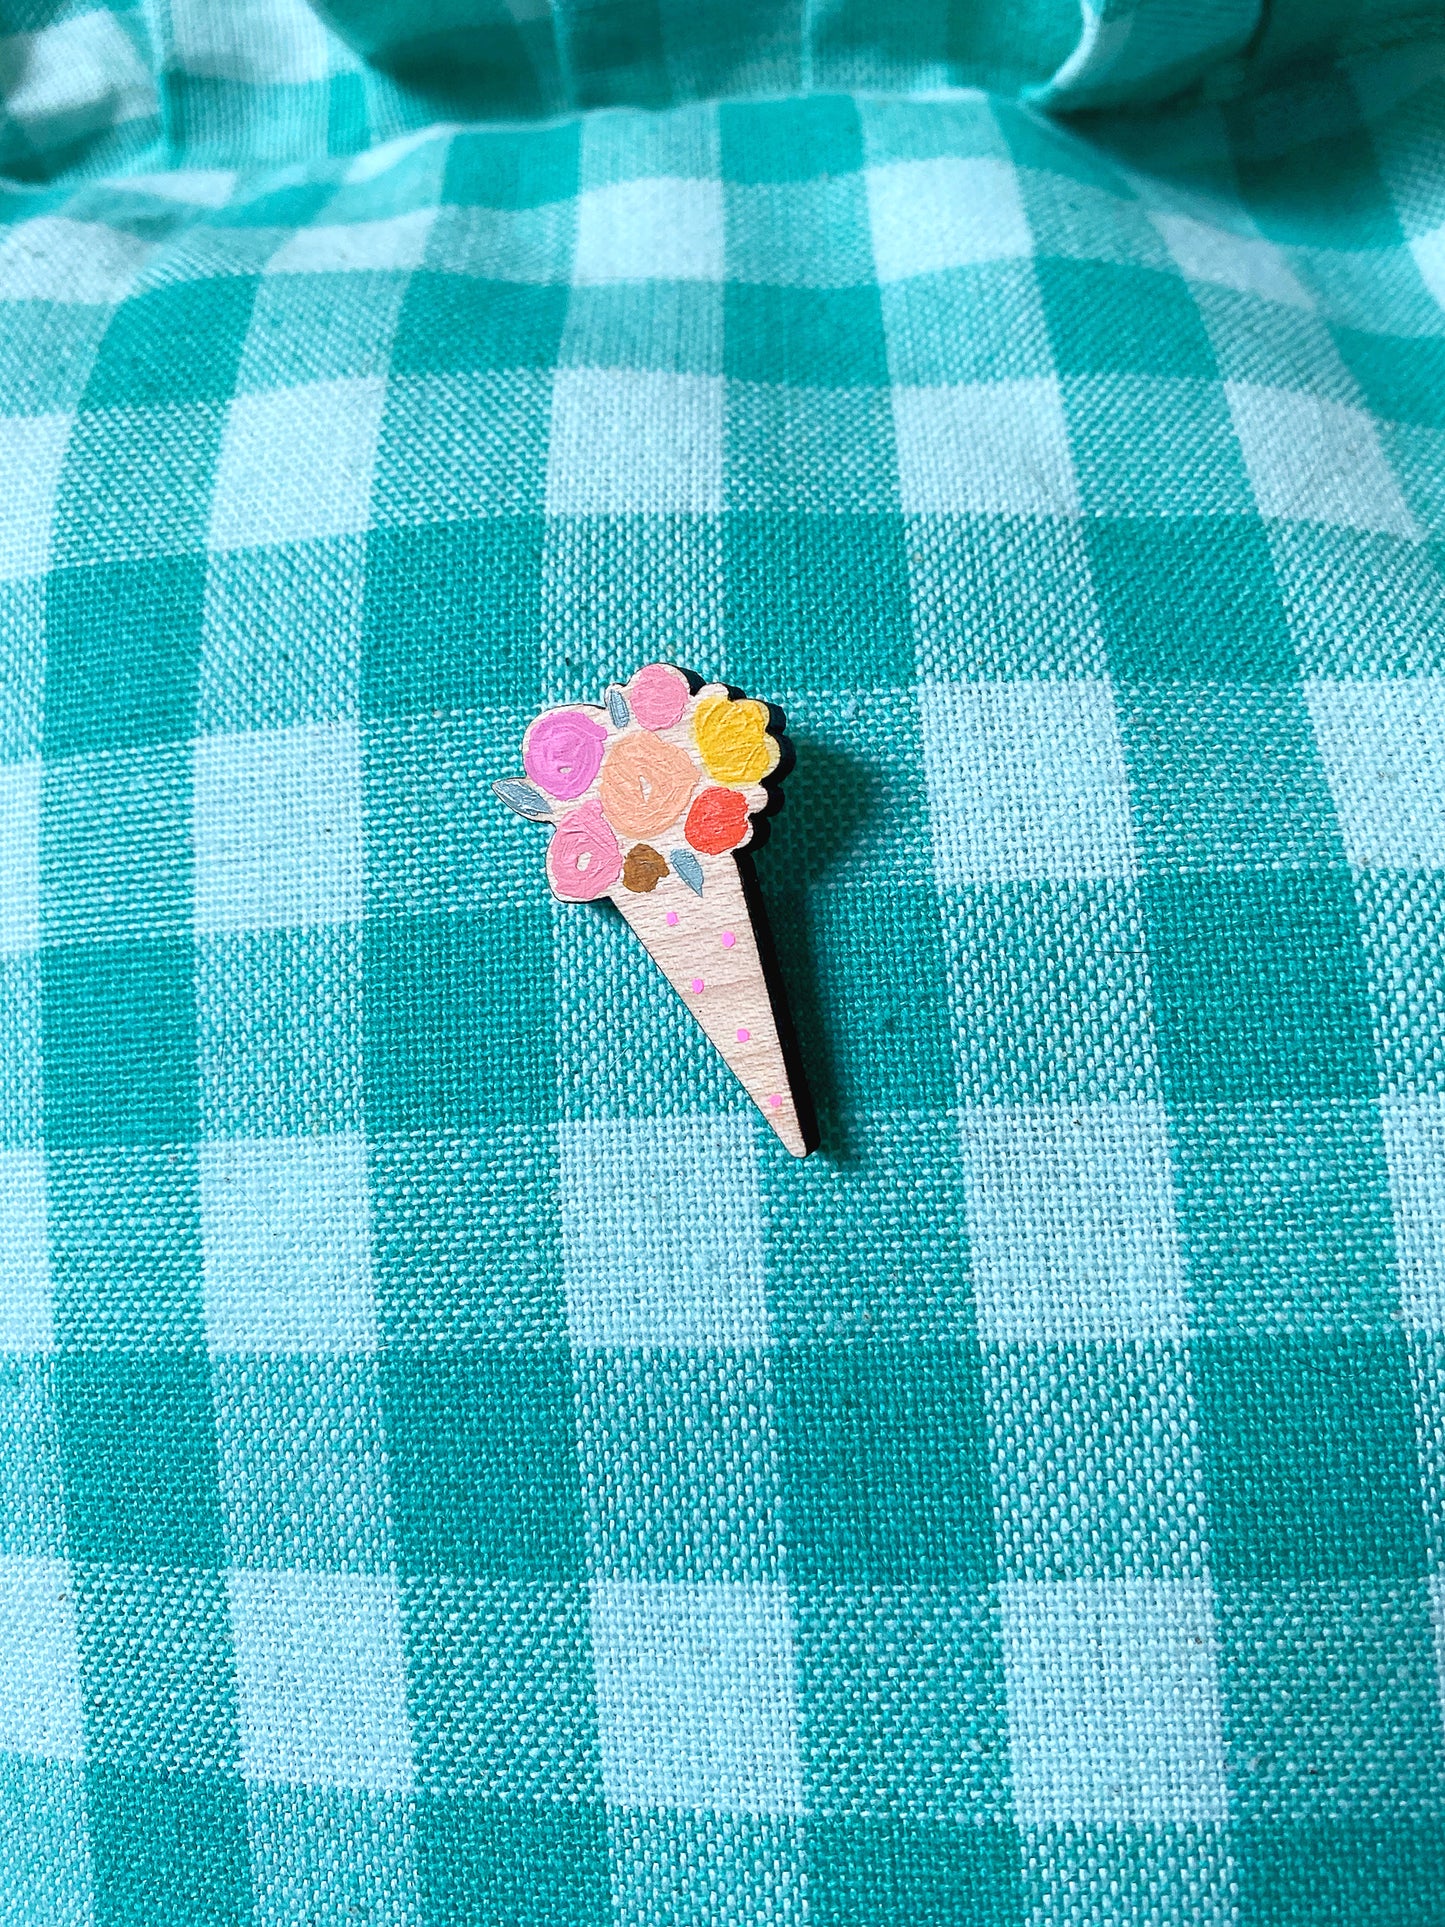 Floral bouquet handpainted wooden pin badge